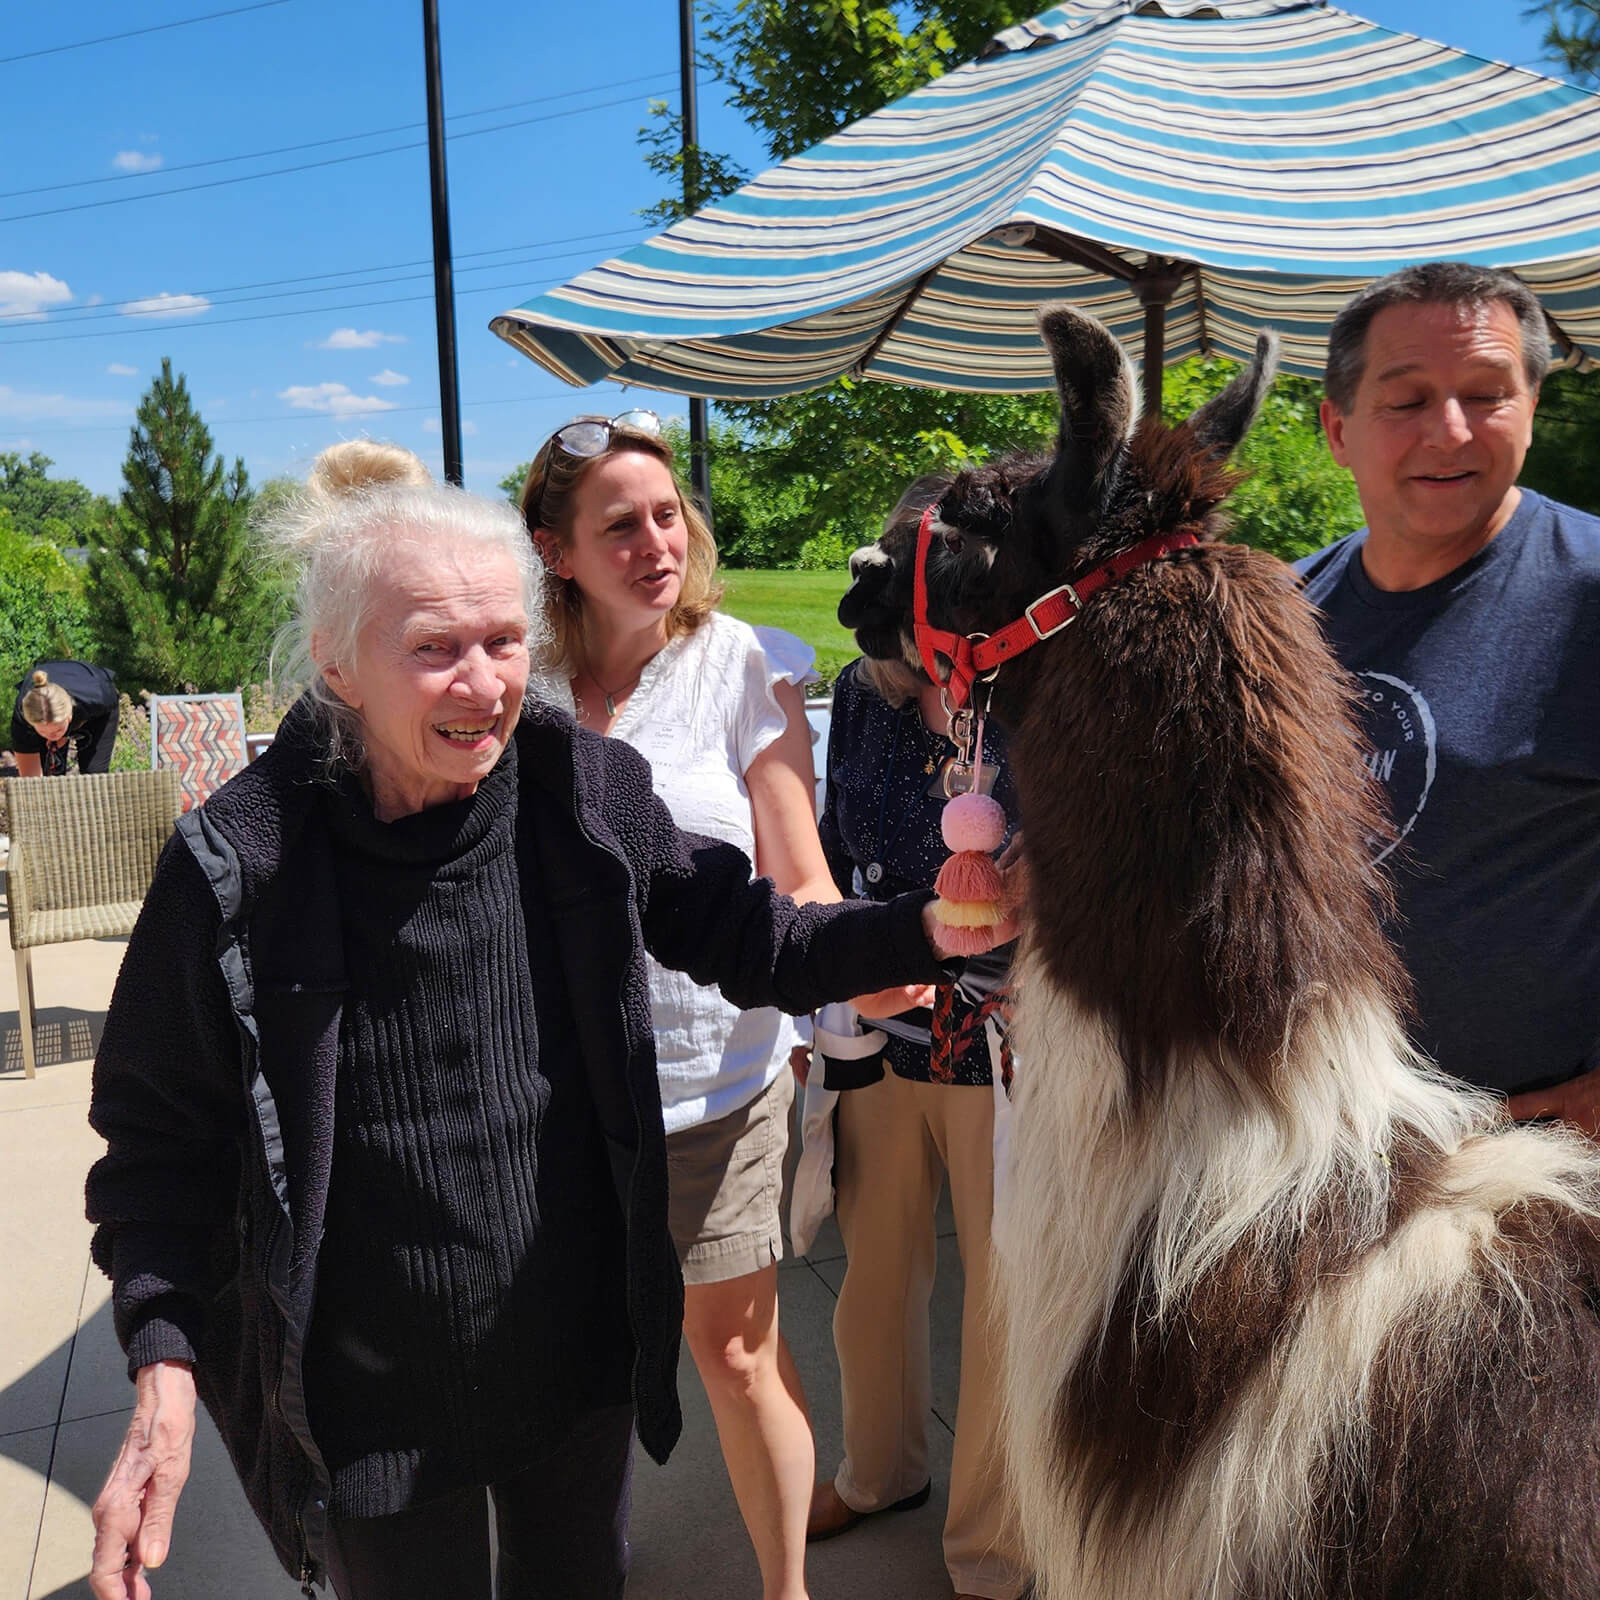 A senior resident at The Waters of Excelsior delightedly interacting with a friendly llama during an animal visitation event.